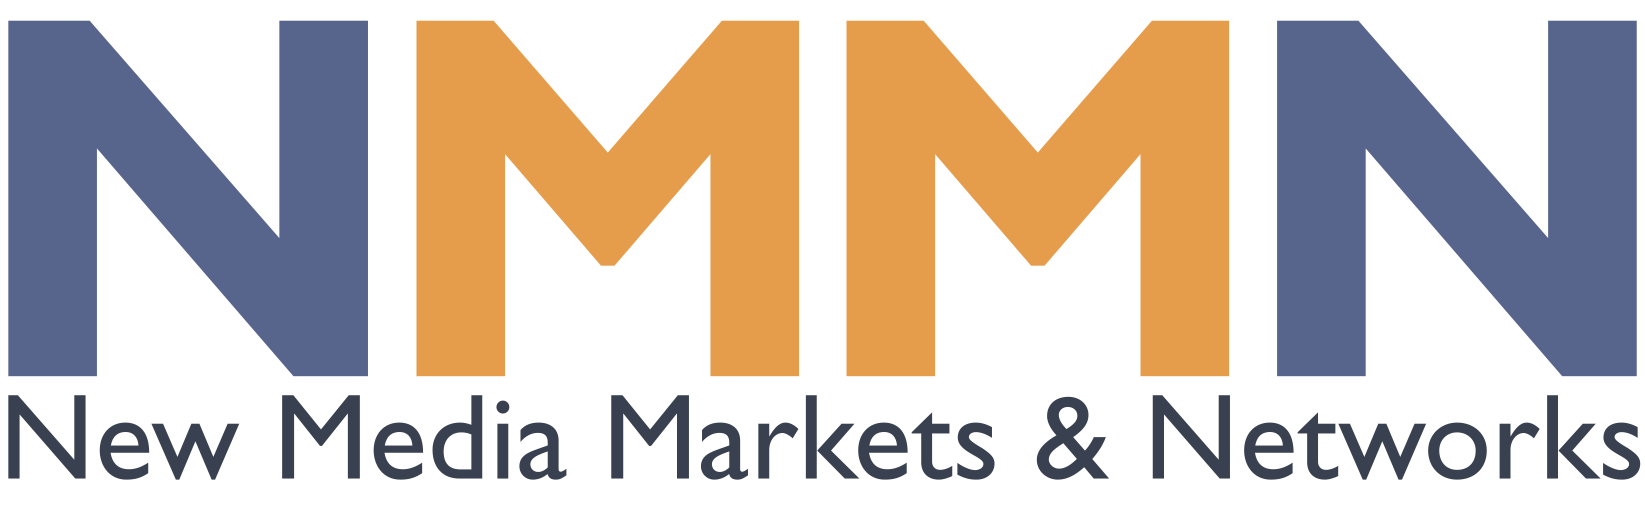 NMMN New Media Markets & Networks IT-Services GmbH